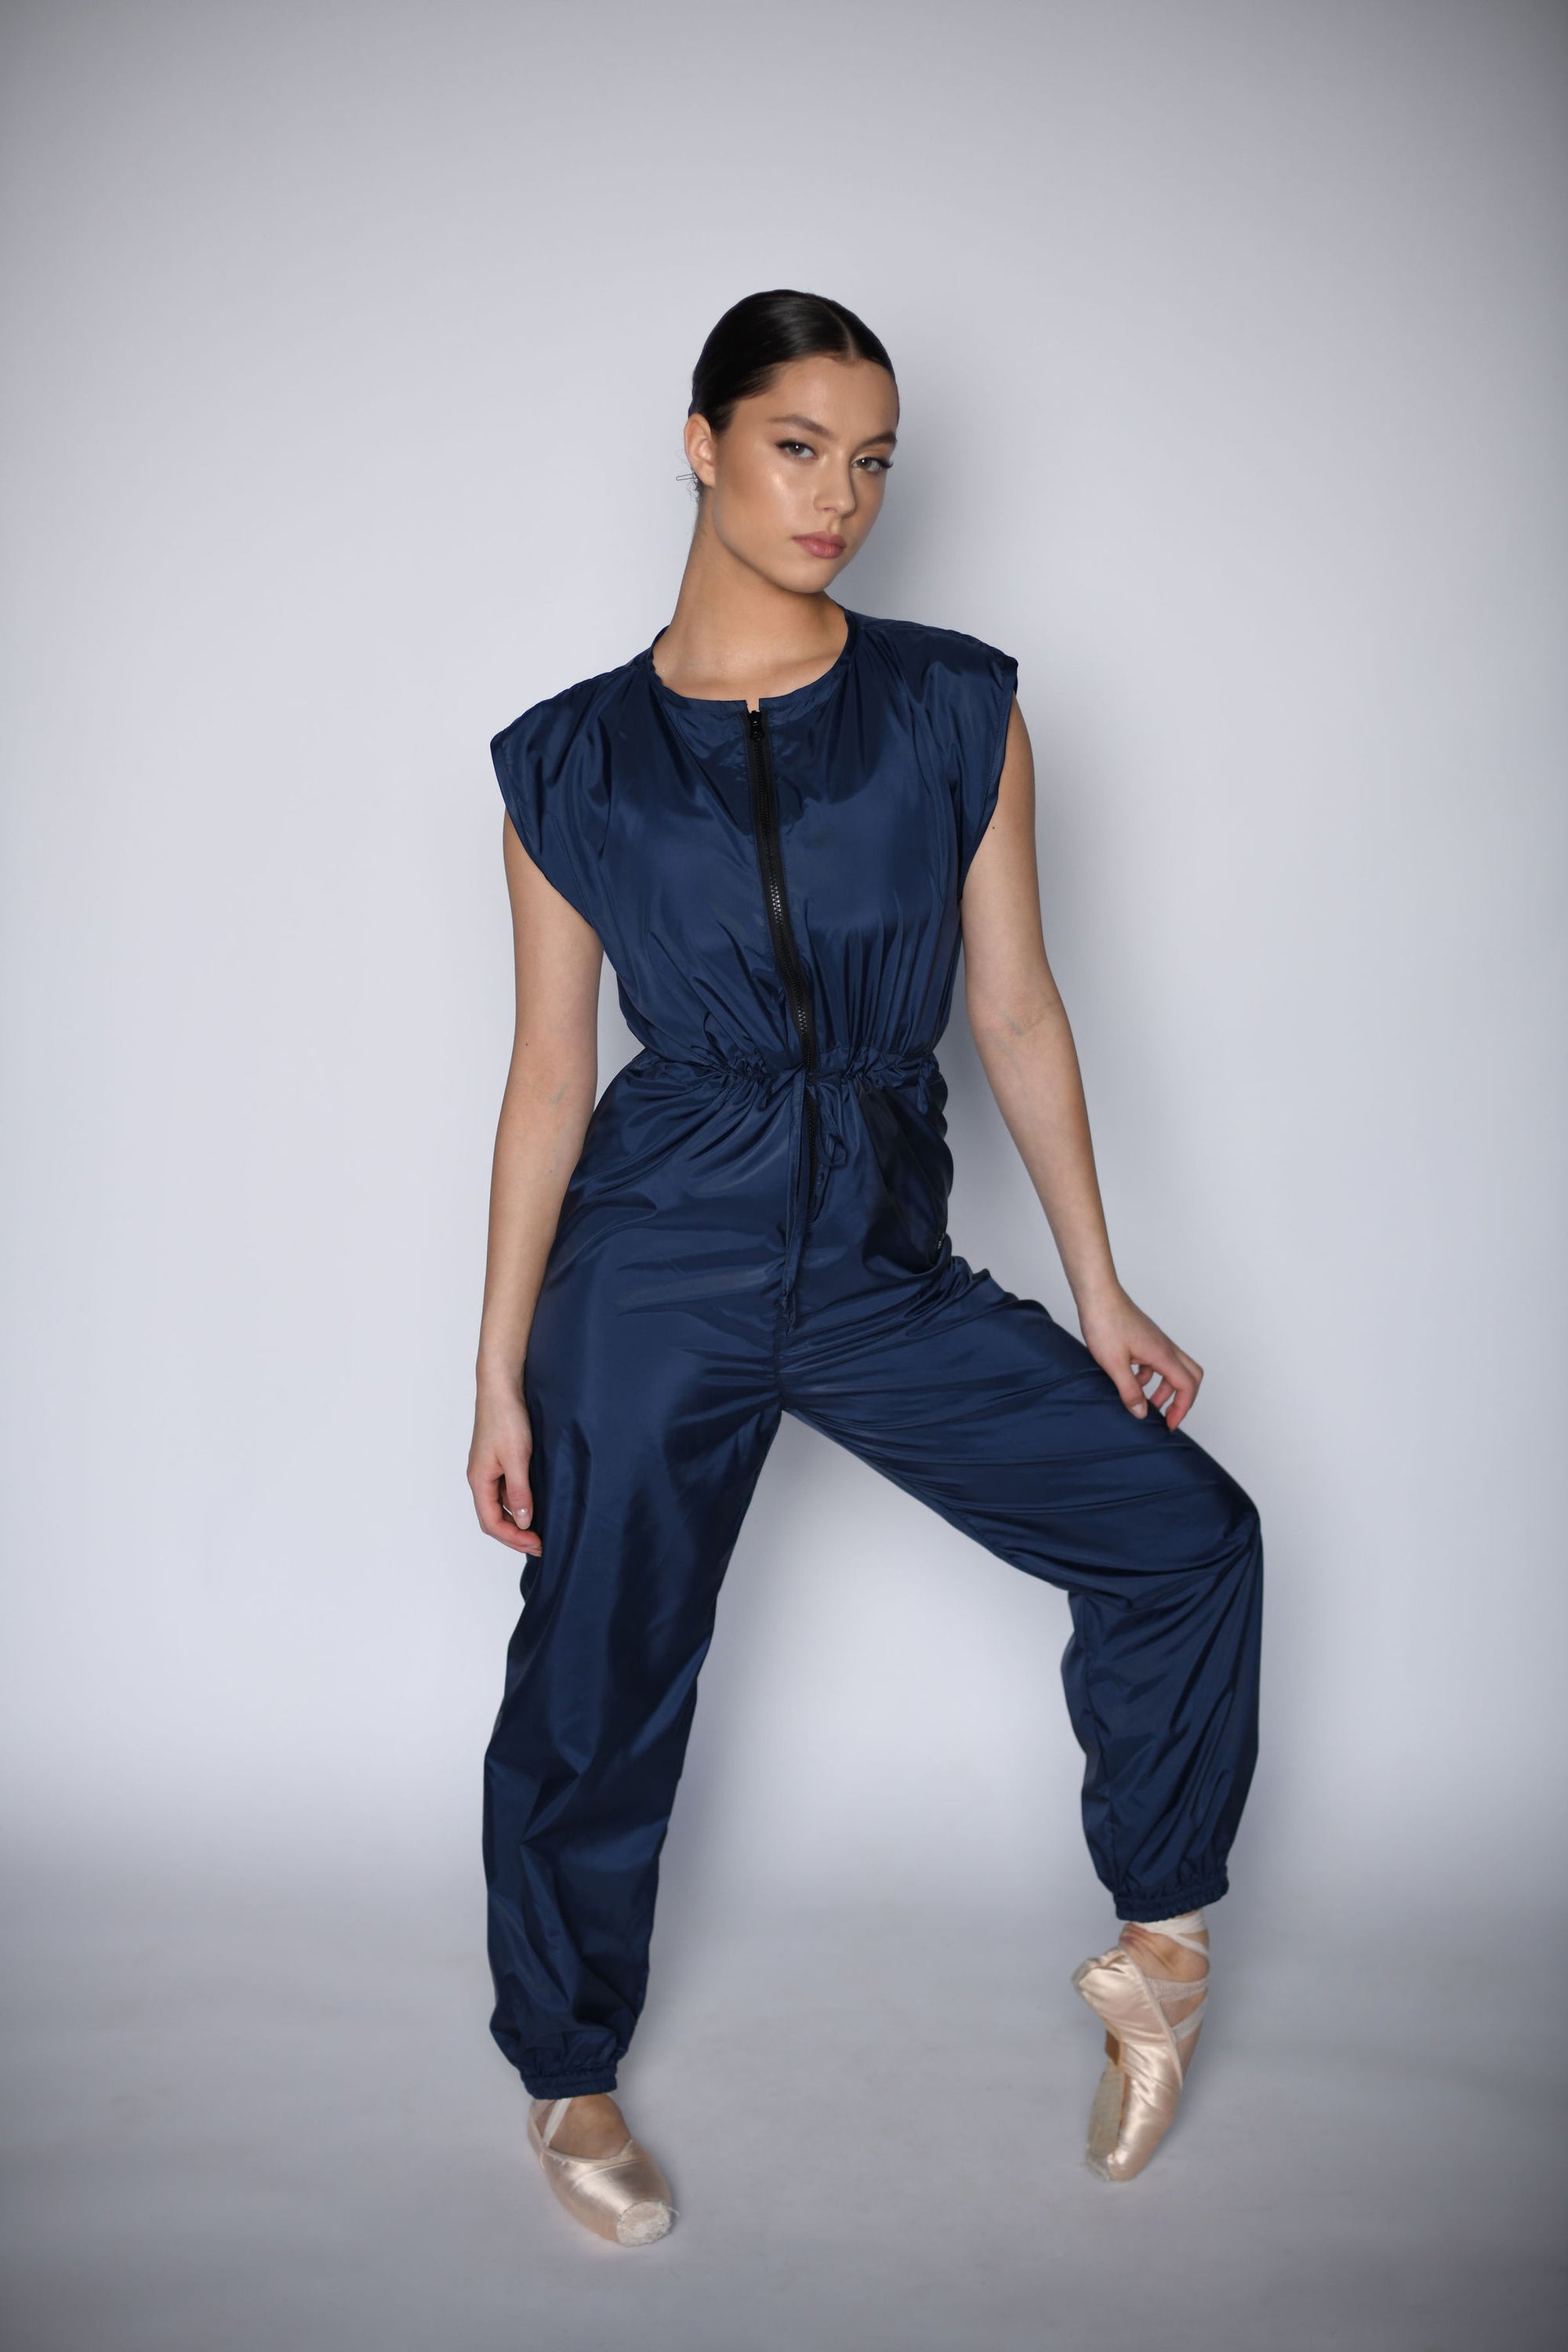 NEW URBAN SWAN COLLECTION S/S 23 | Royal blue onesie